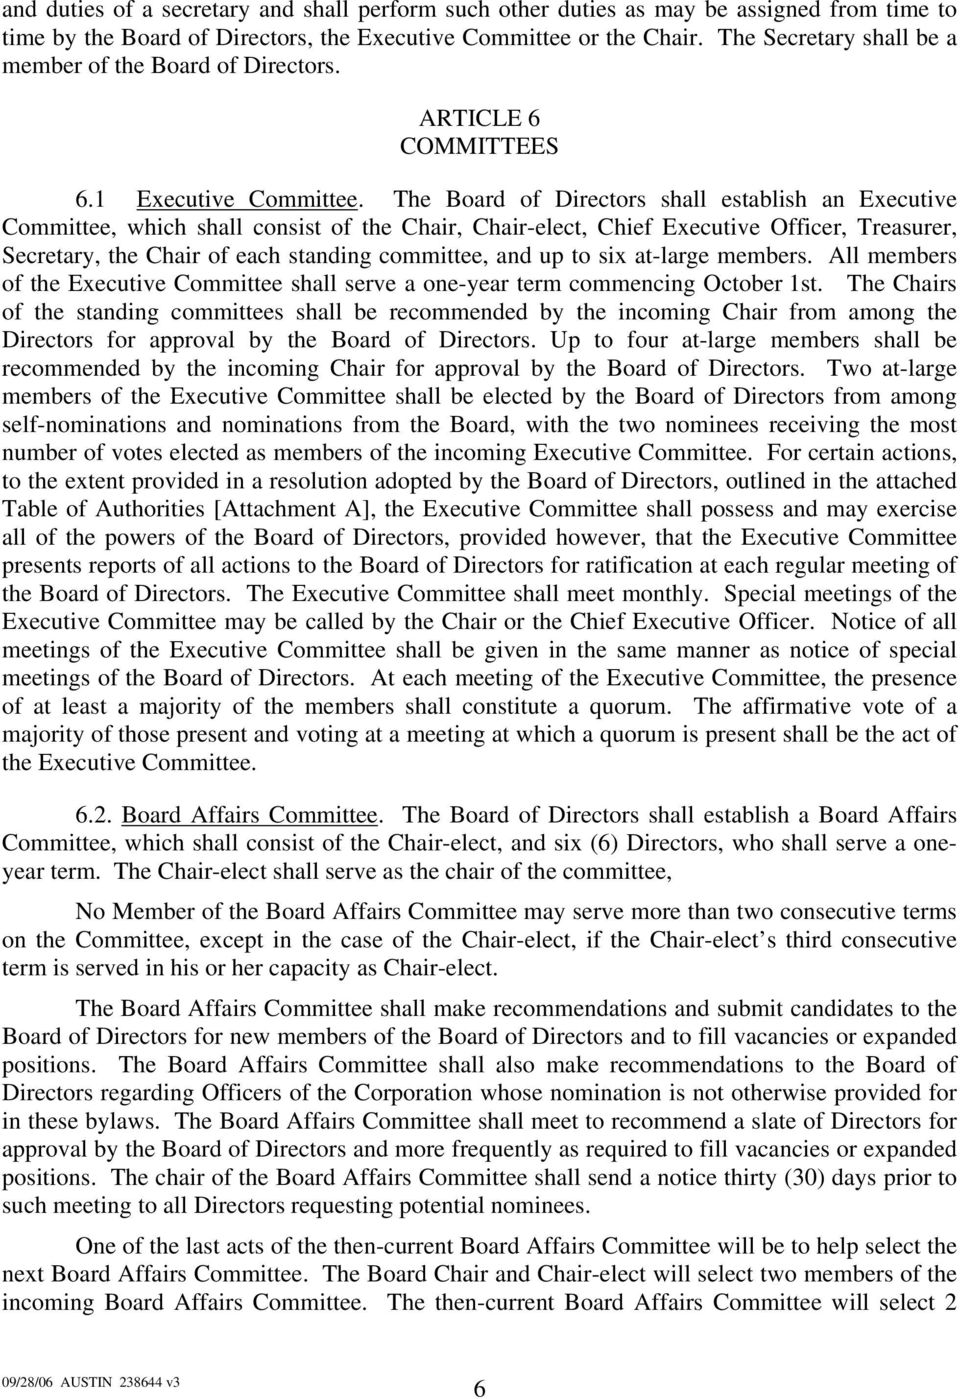 The Board of Directors shall establish an Executive Committee, which shall consist of the Chair, Chair-elect, Chief Executive Officer, Treasurer, Secretary, the Chair of each standing committee, and